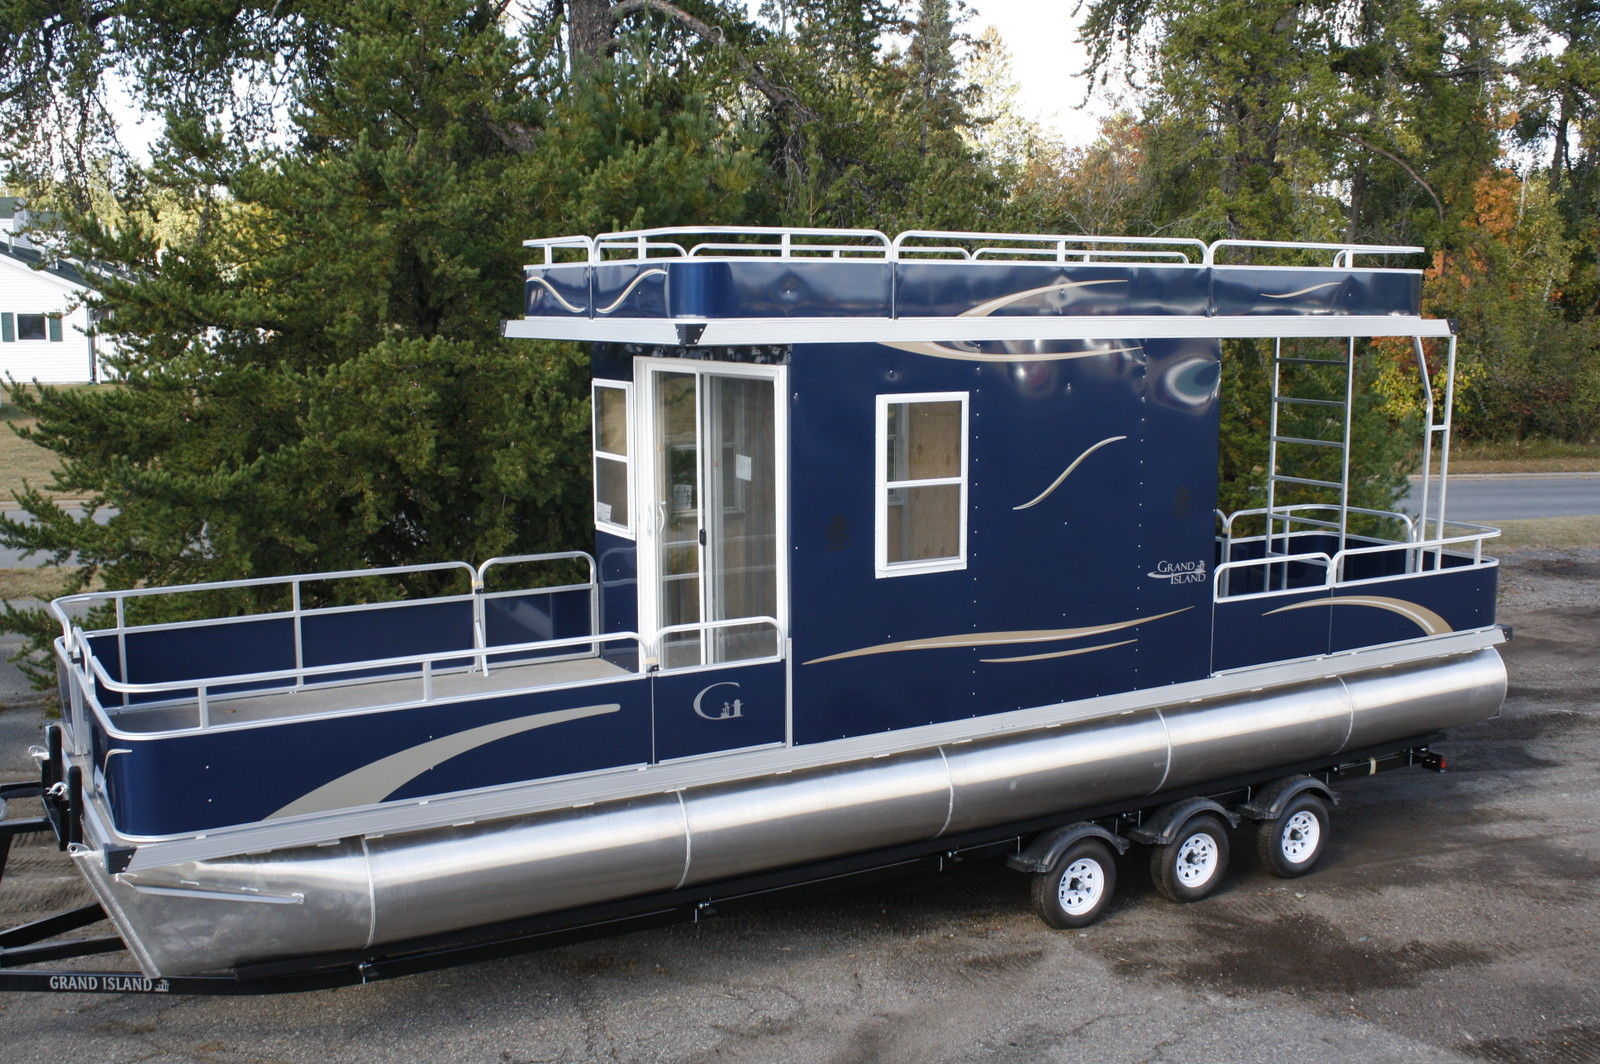 Grand Island 32 2014 for sale for $29,999 - Boats-from-USA.com